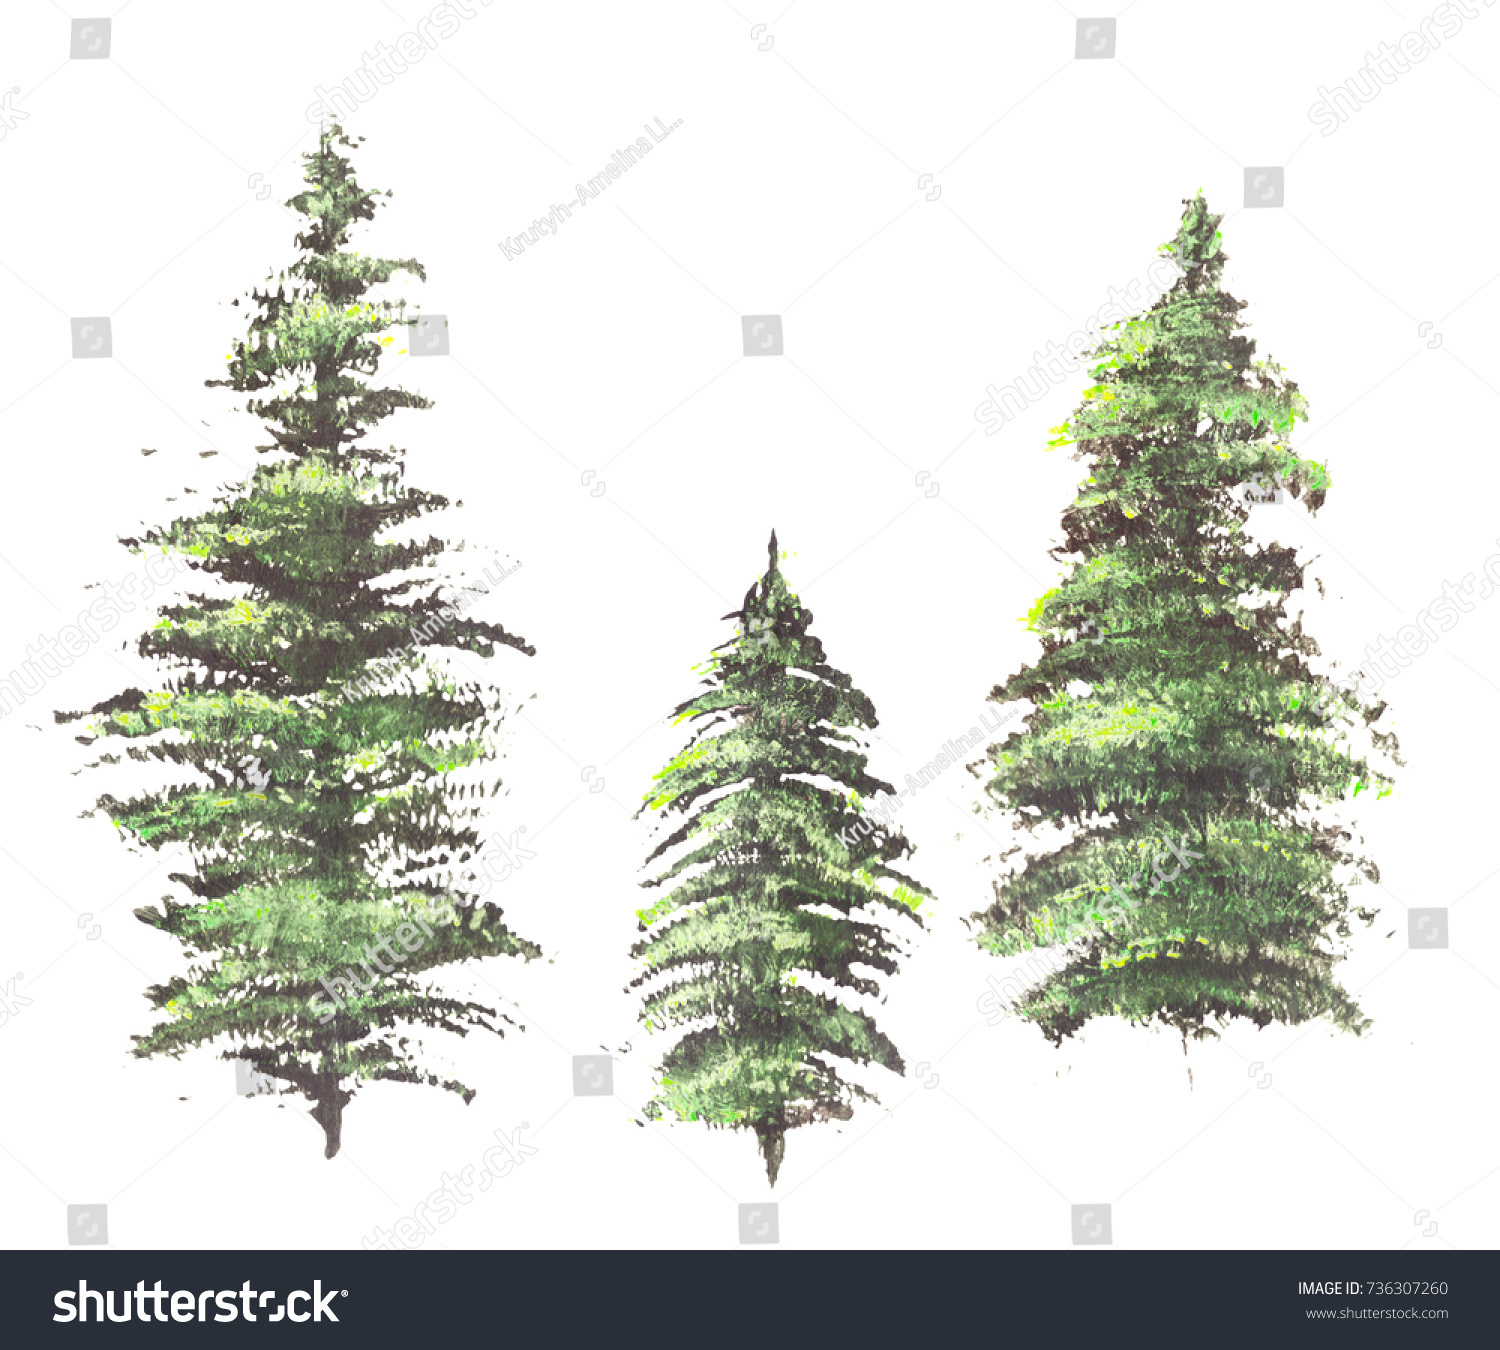 Hand drawn acrylic vibrant pine green trees isolated on white background. #736307260